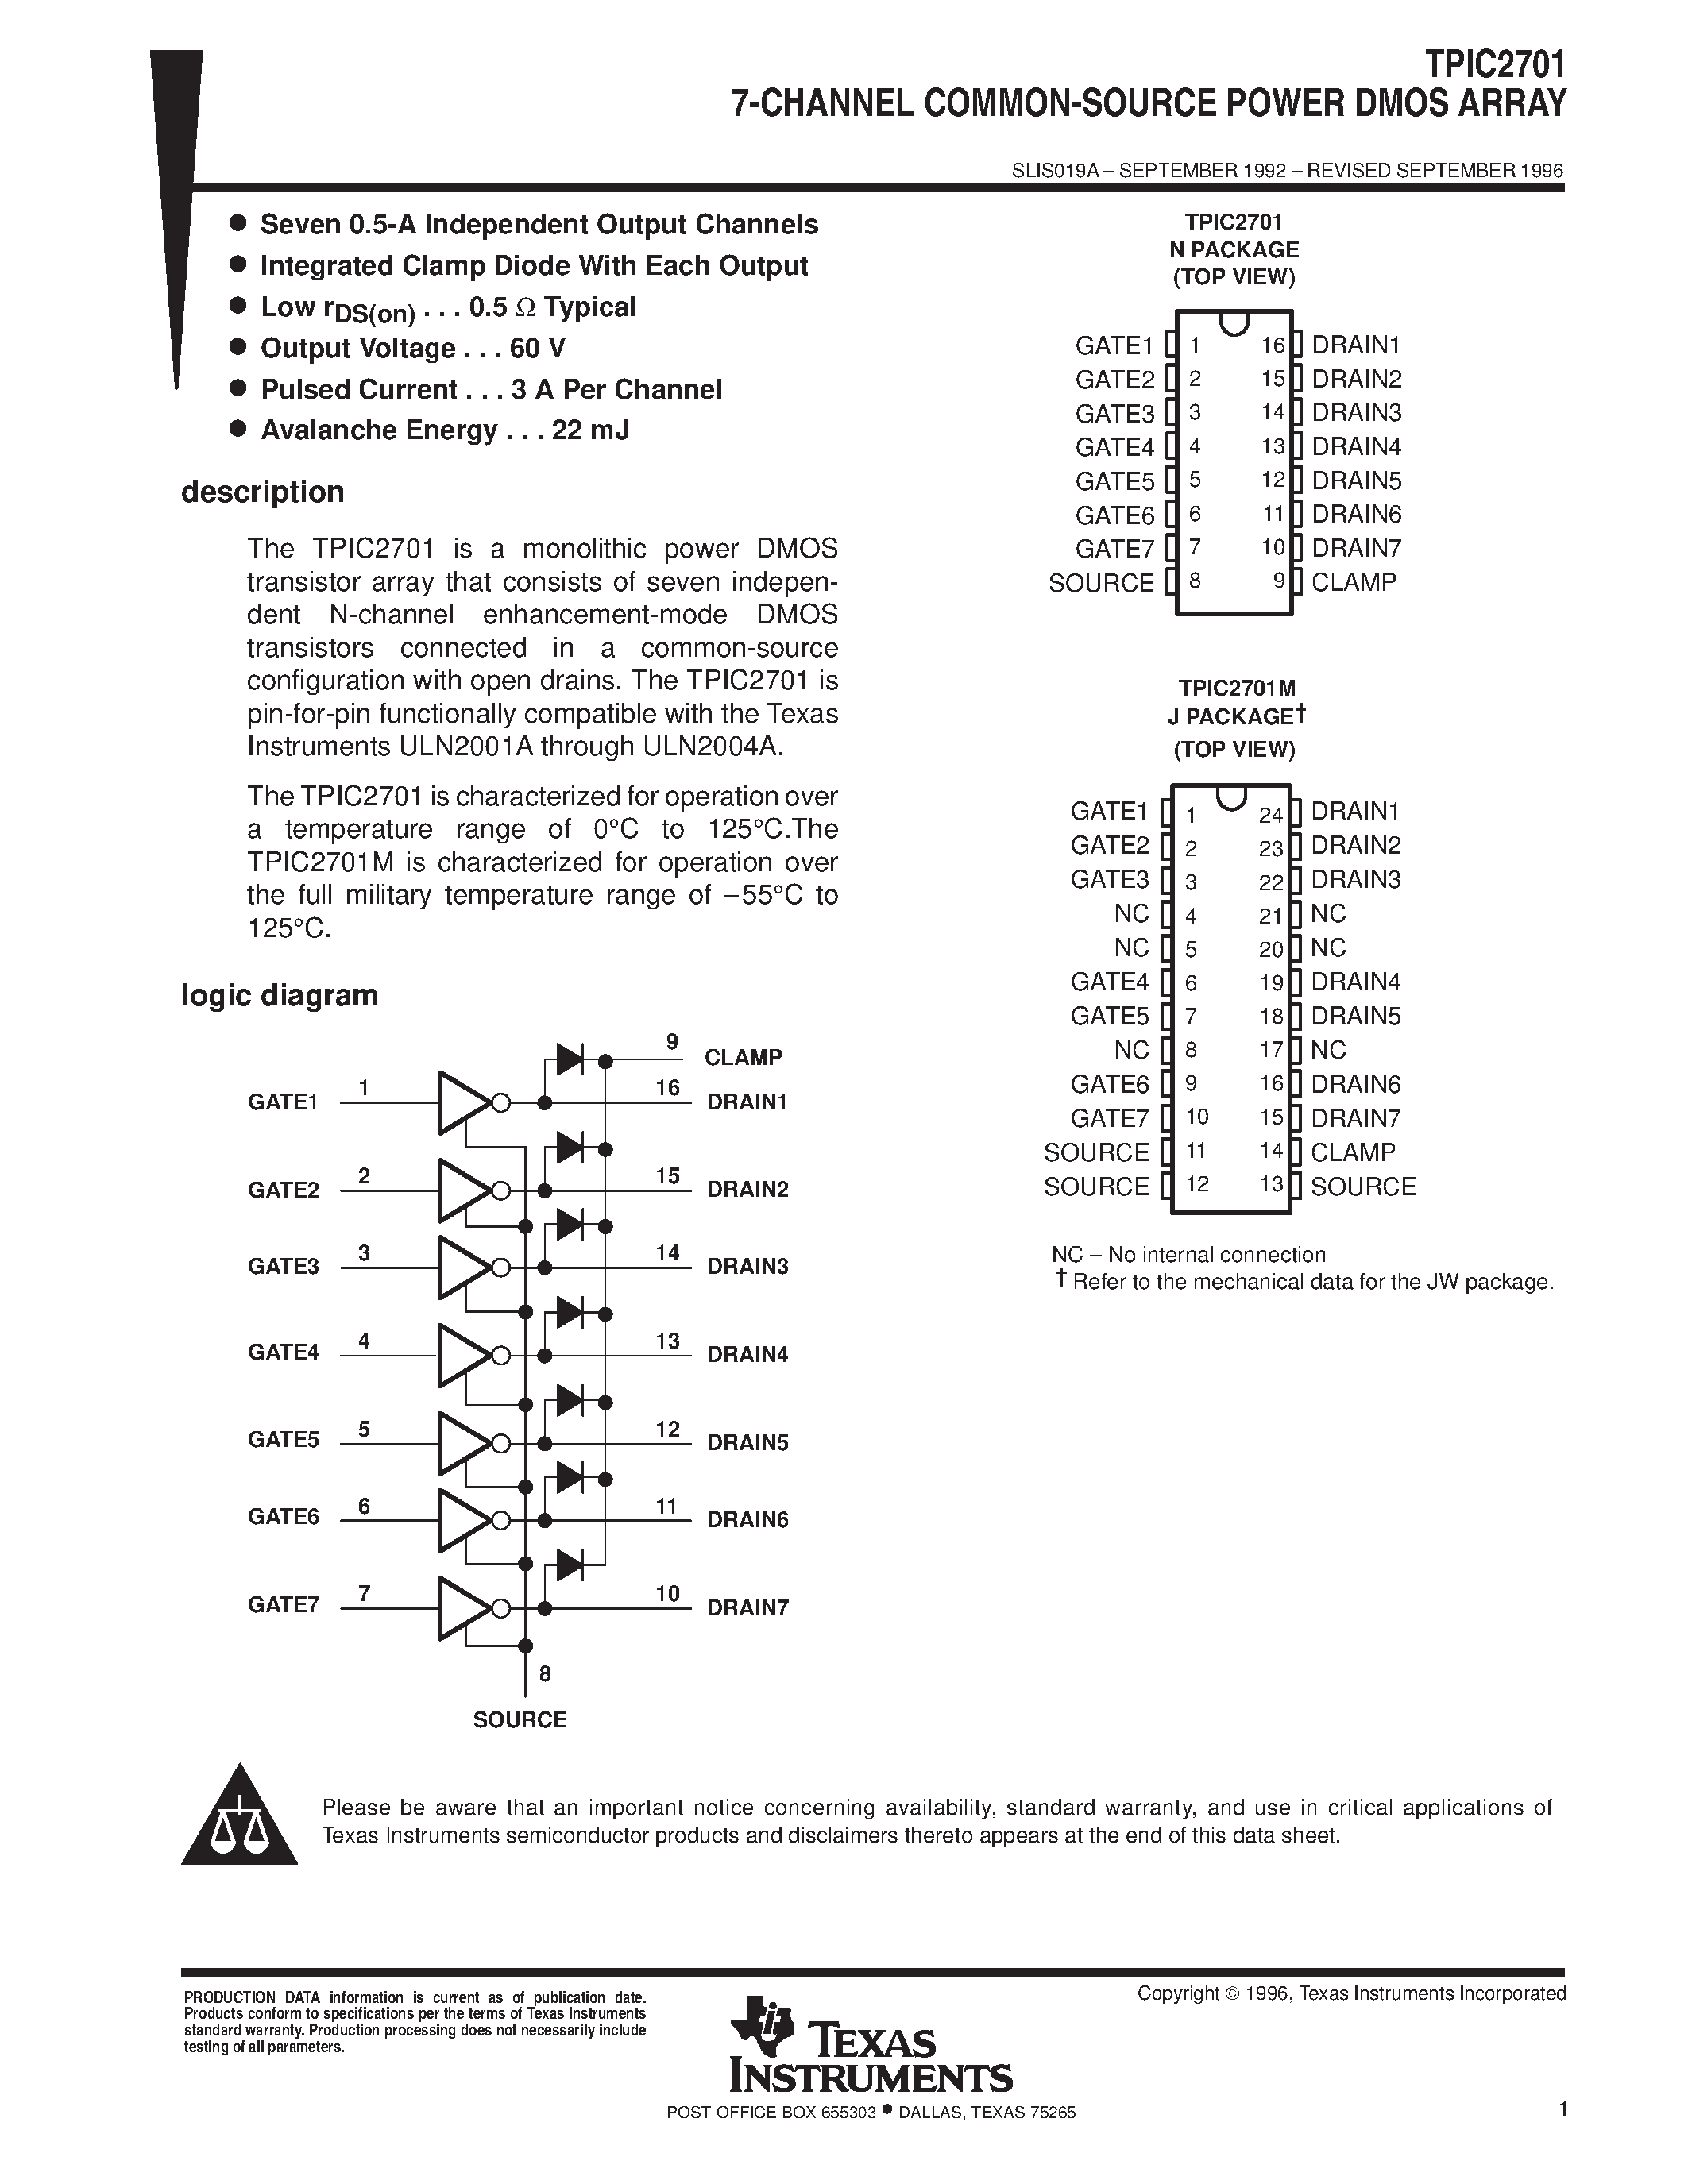 Datasheet TPIC2701 - 7-CHANNEL COMMON-SOURCE POWER DMOS ARRAY page 1